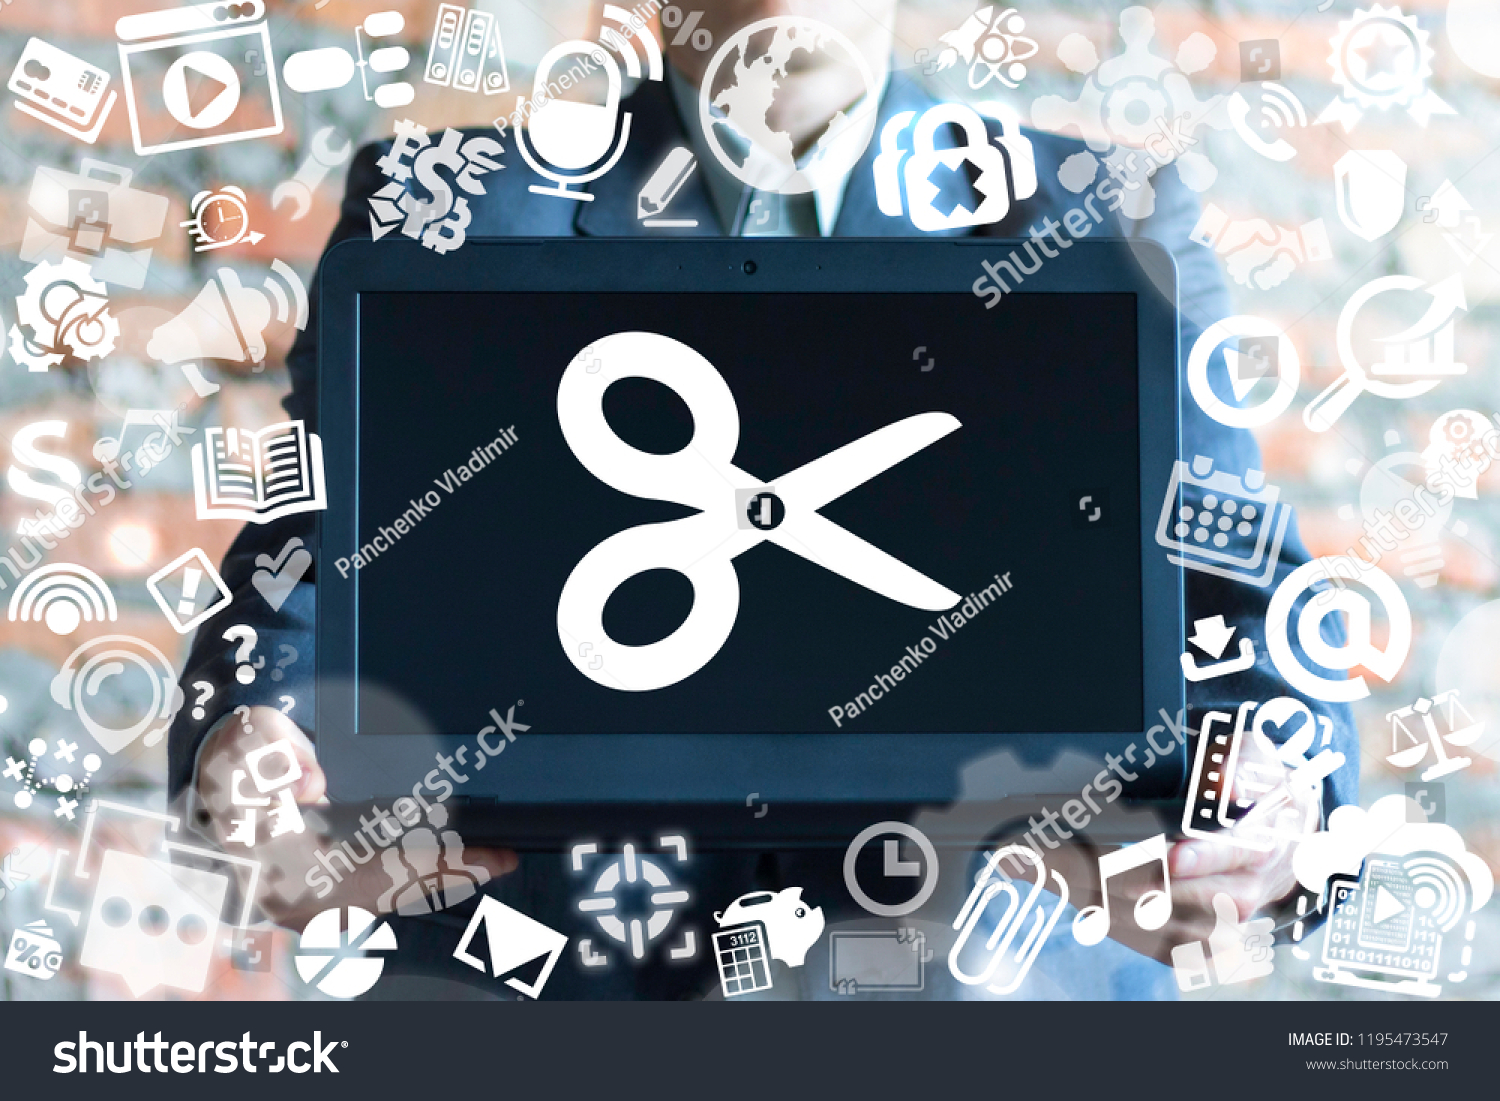 Man Offers Laptop Scissors Icon On Stock Photo Edit Now 1195473547 - oofers song roblox song